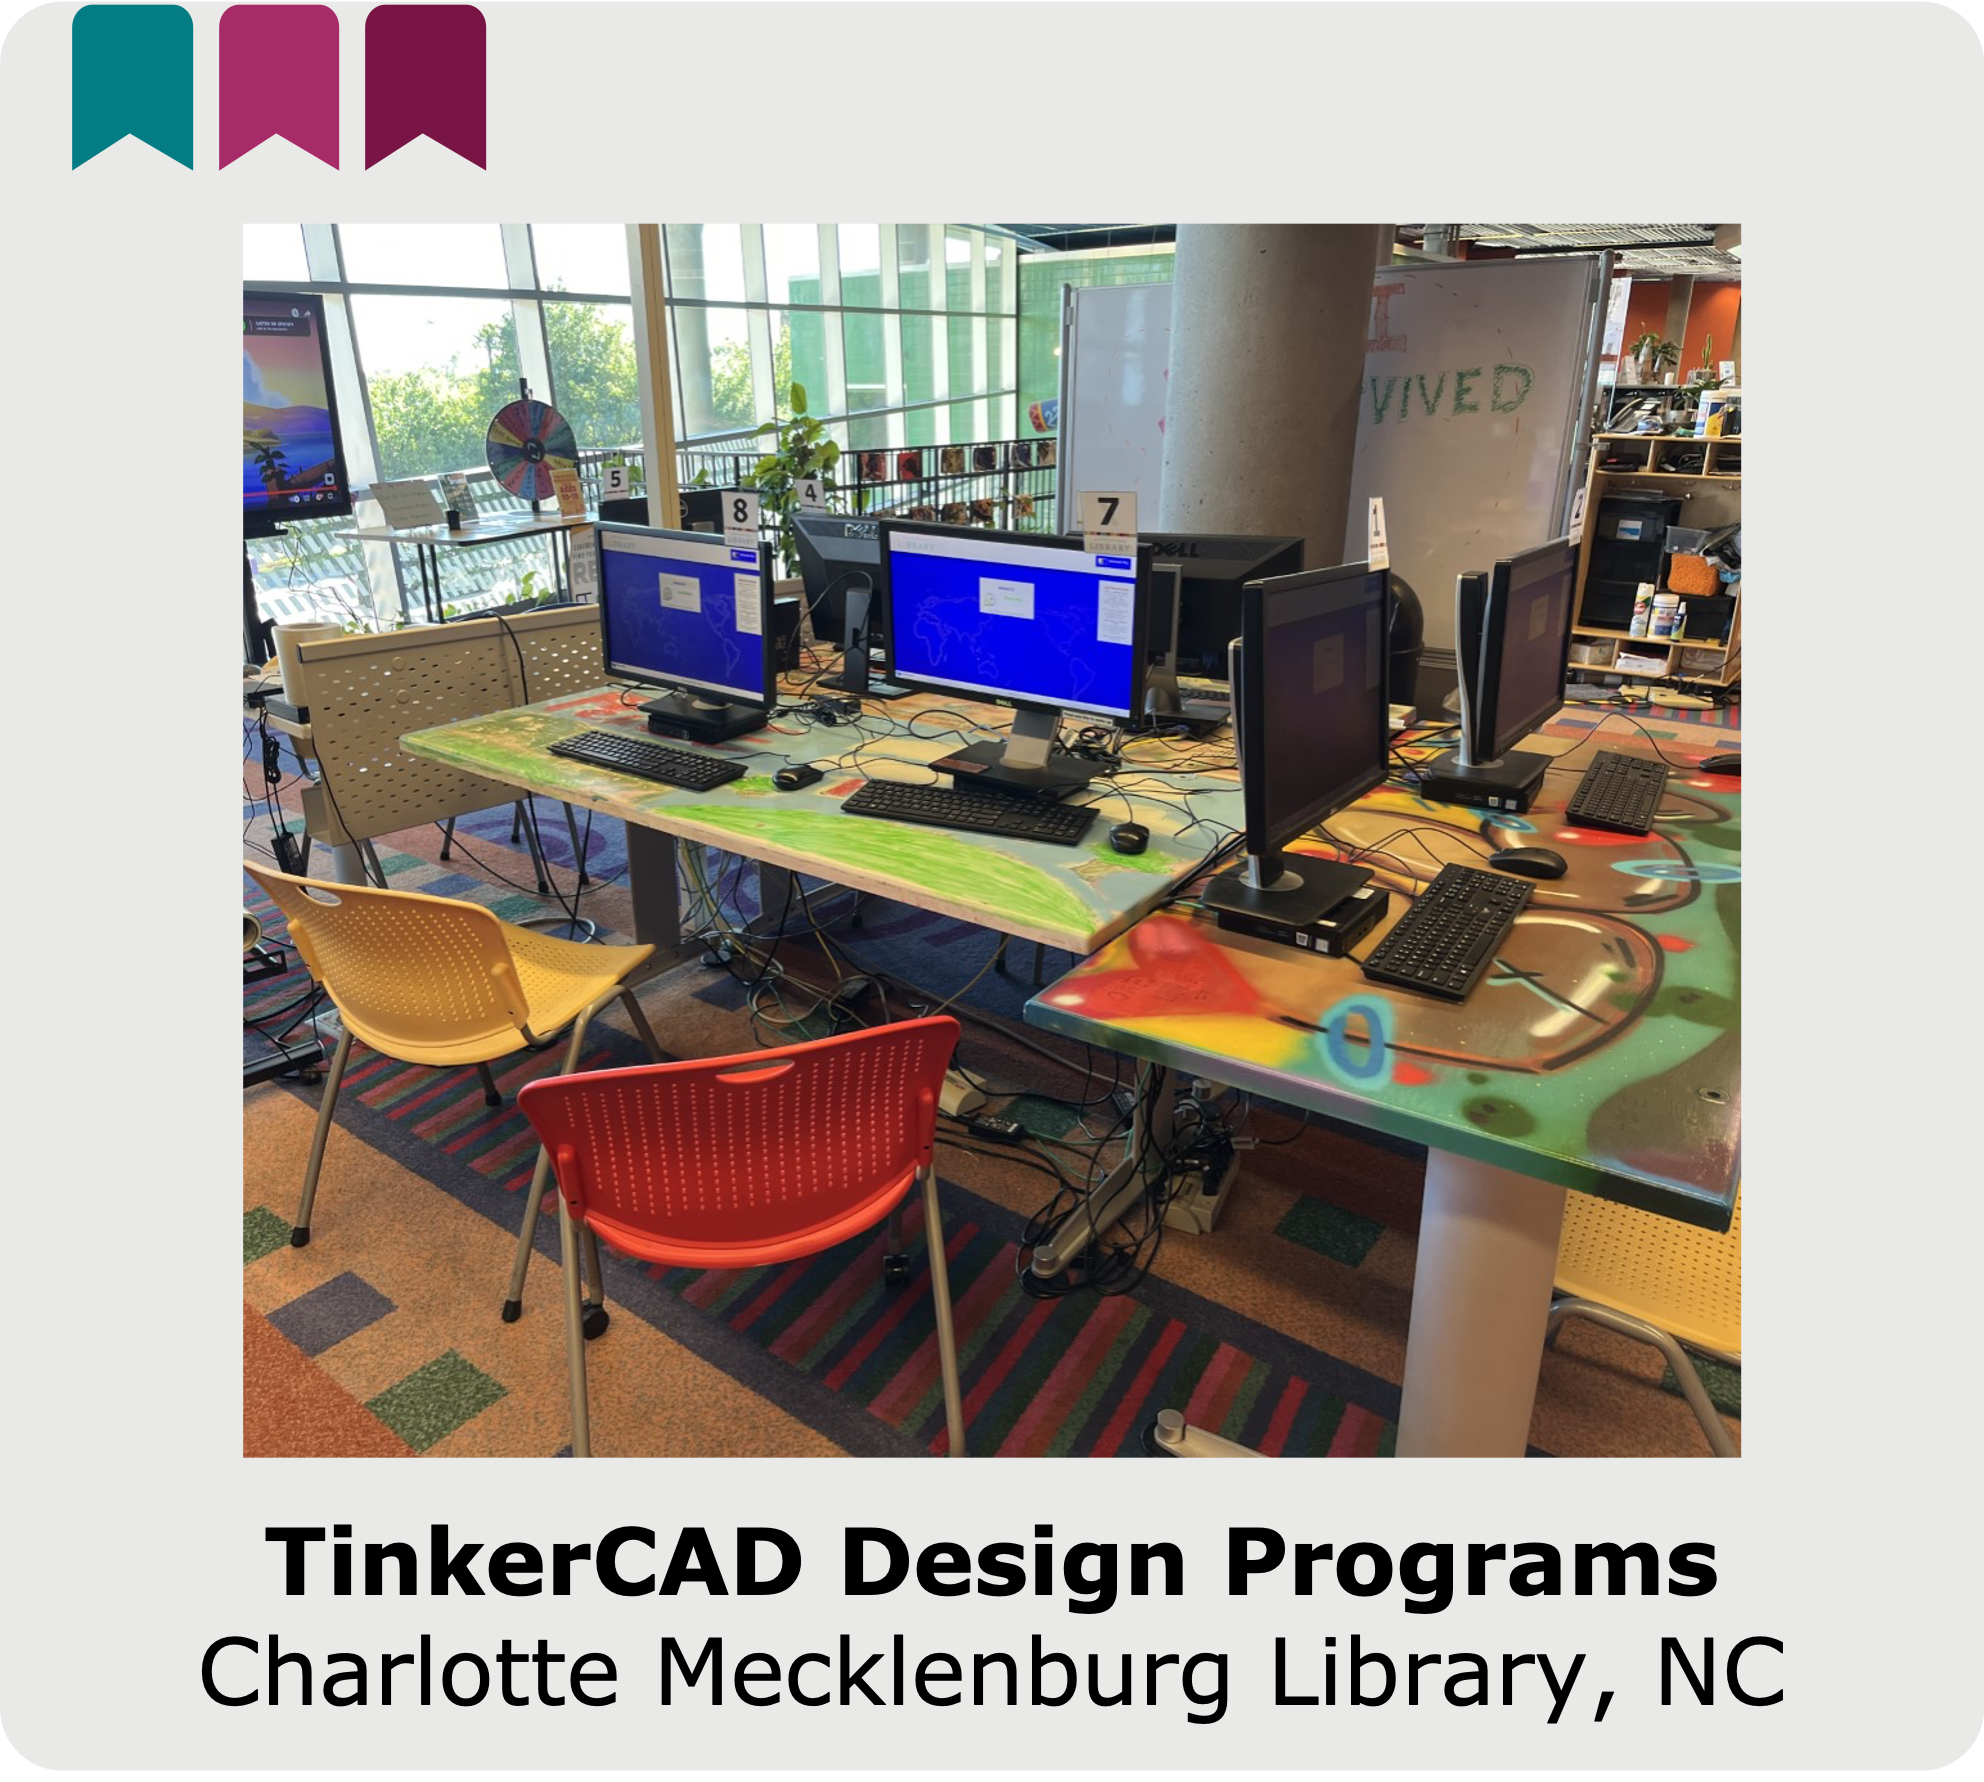 Click to open the case study of the tinker CAD design program at the Charlotte Mecklenburg Library in North Carolina.